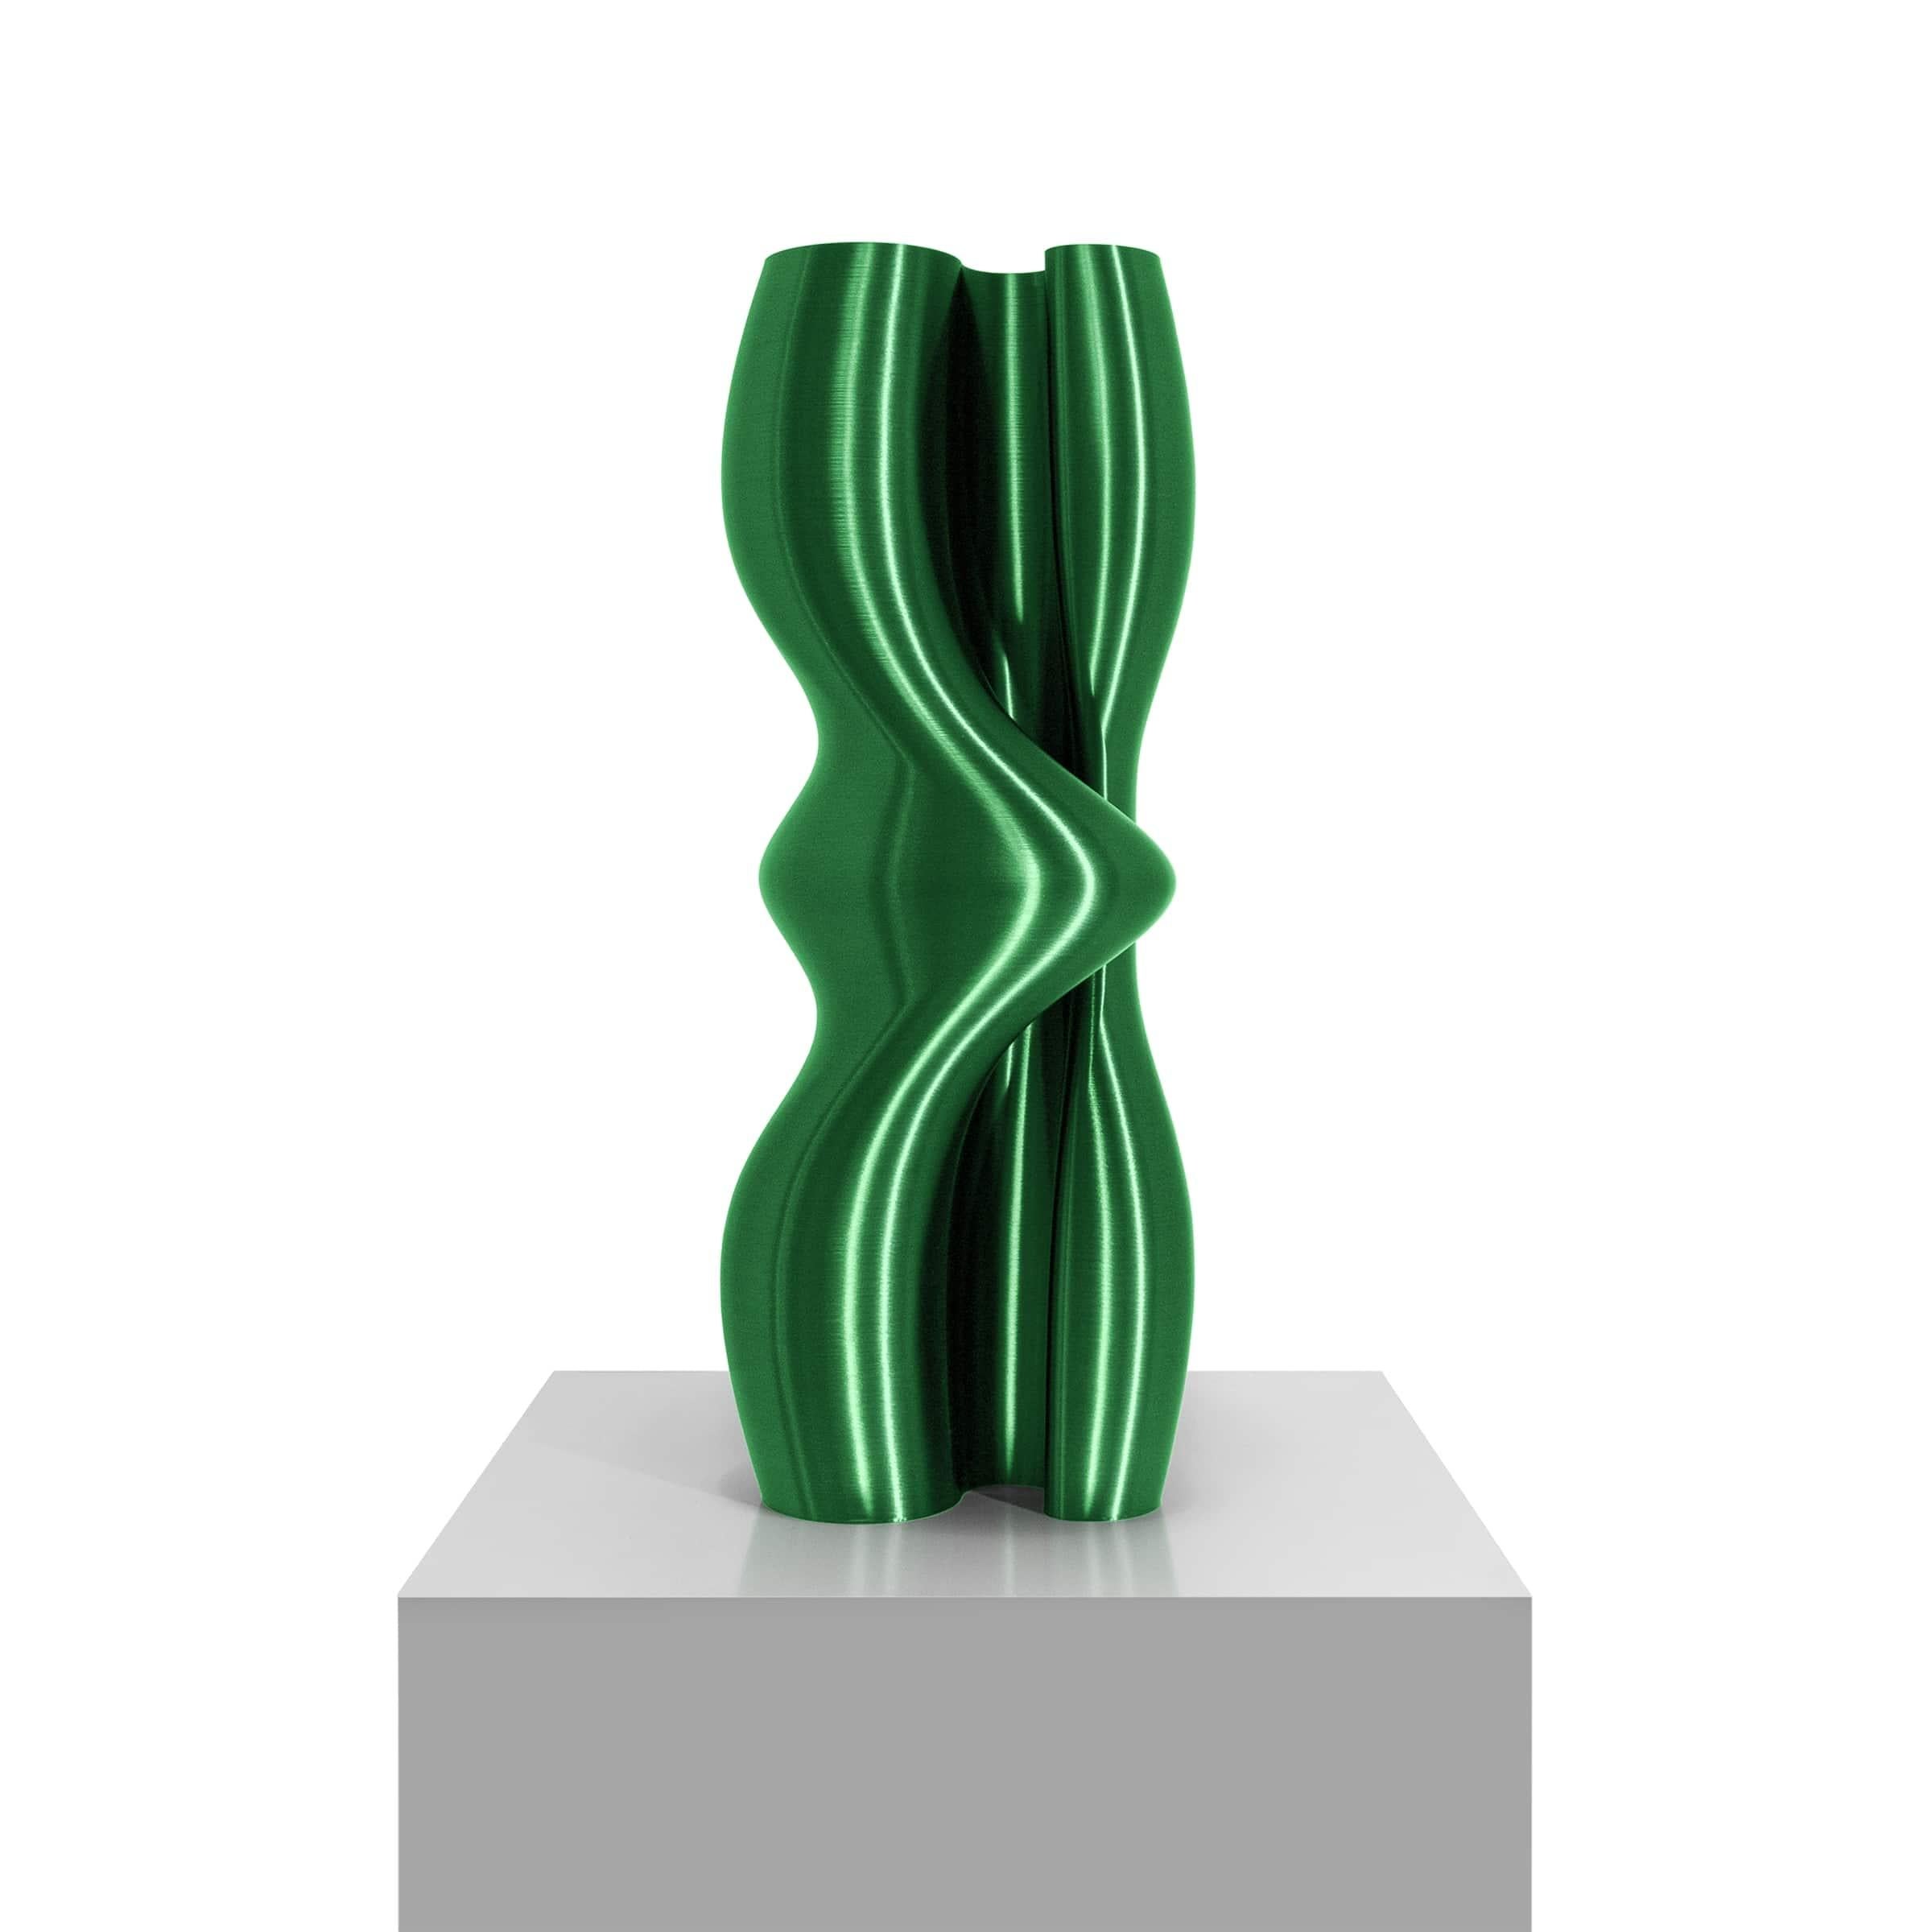 Vase-Sculpture by DygoDesign
Defined by a luminous and vivacious metallic shade, this stunning sculpture is part of the Dygo Selection Collection. Boasting an organic, contemporary character, it features sinuous, enveloping shapes inspired by the